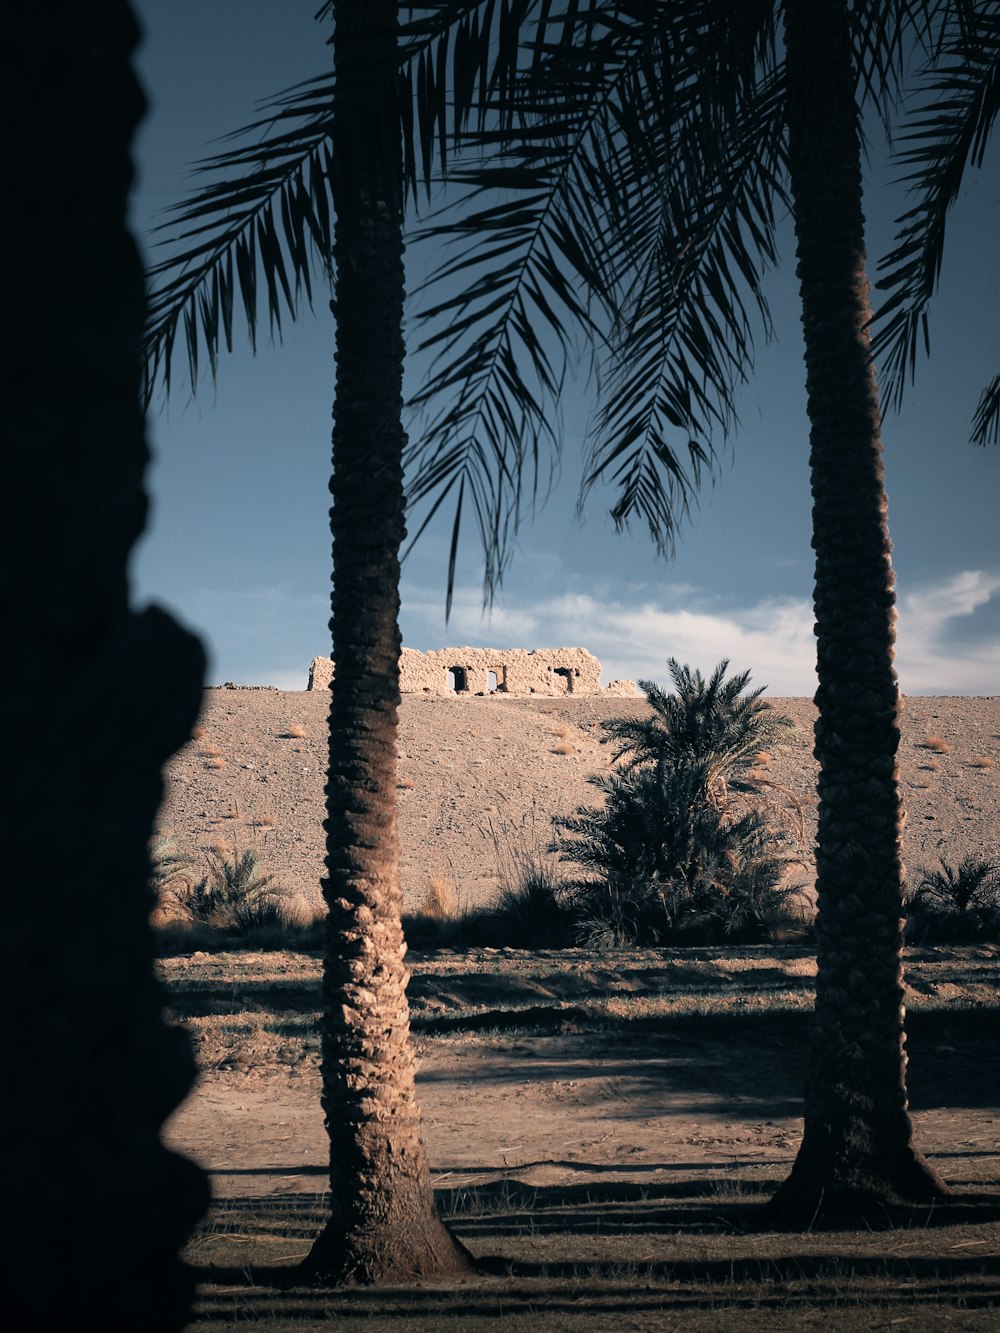 a desert landscape with palm trees